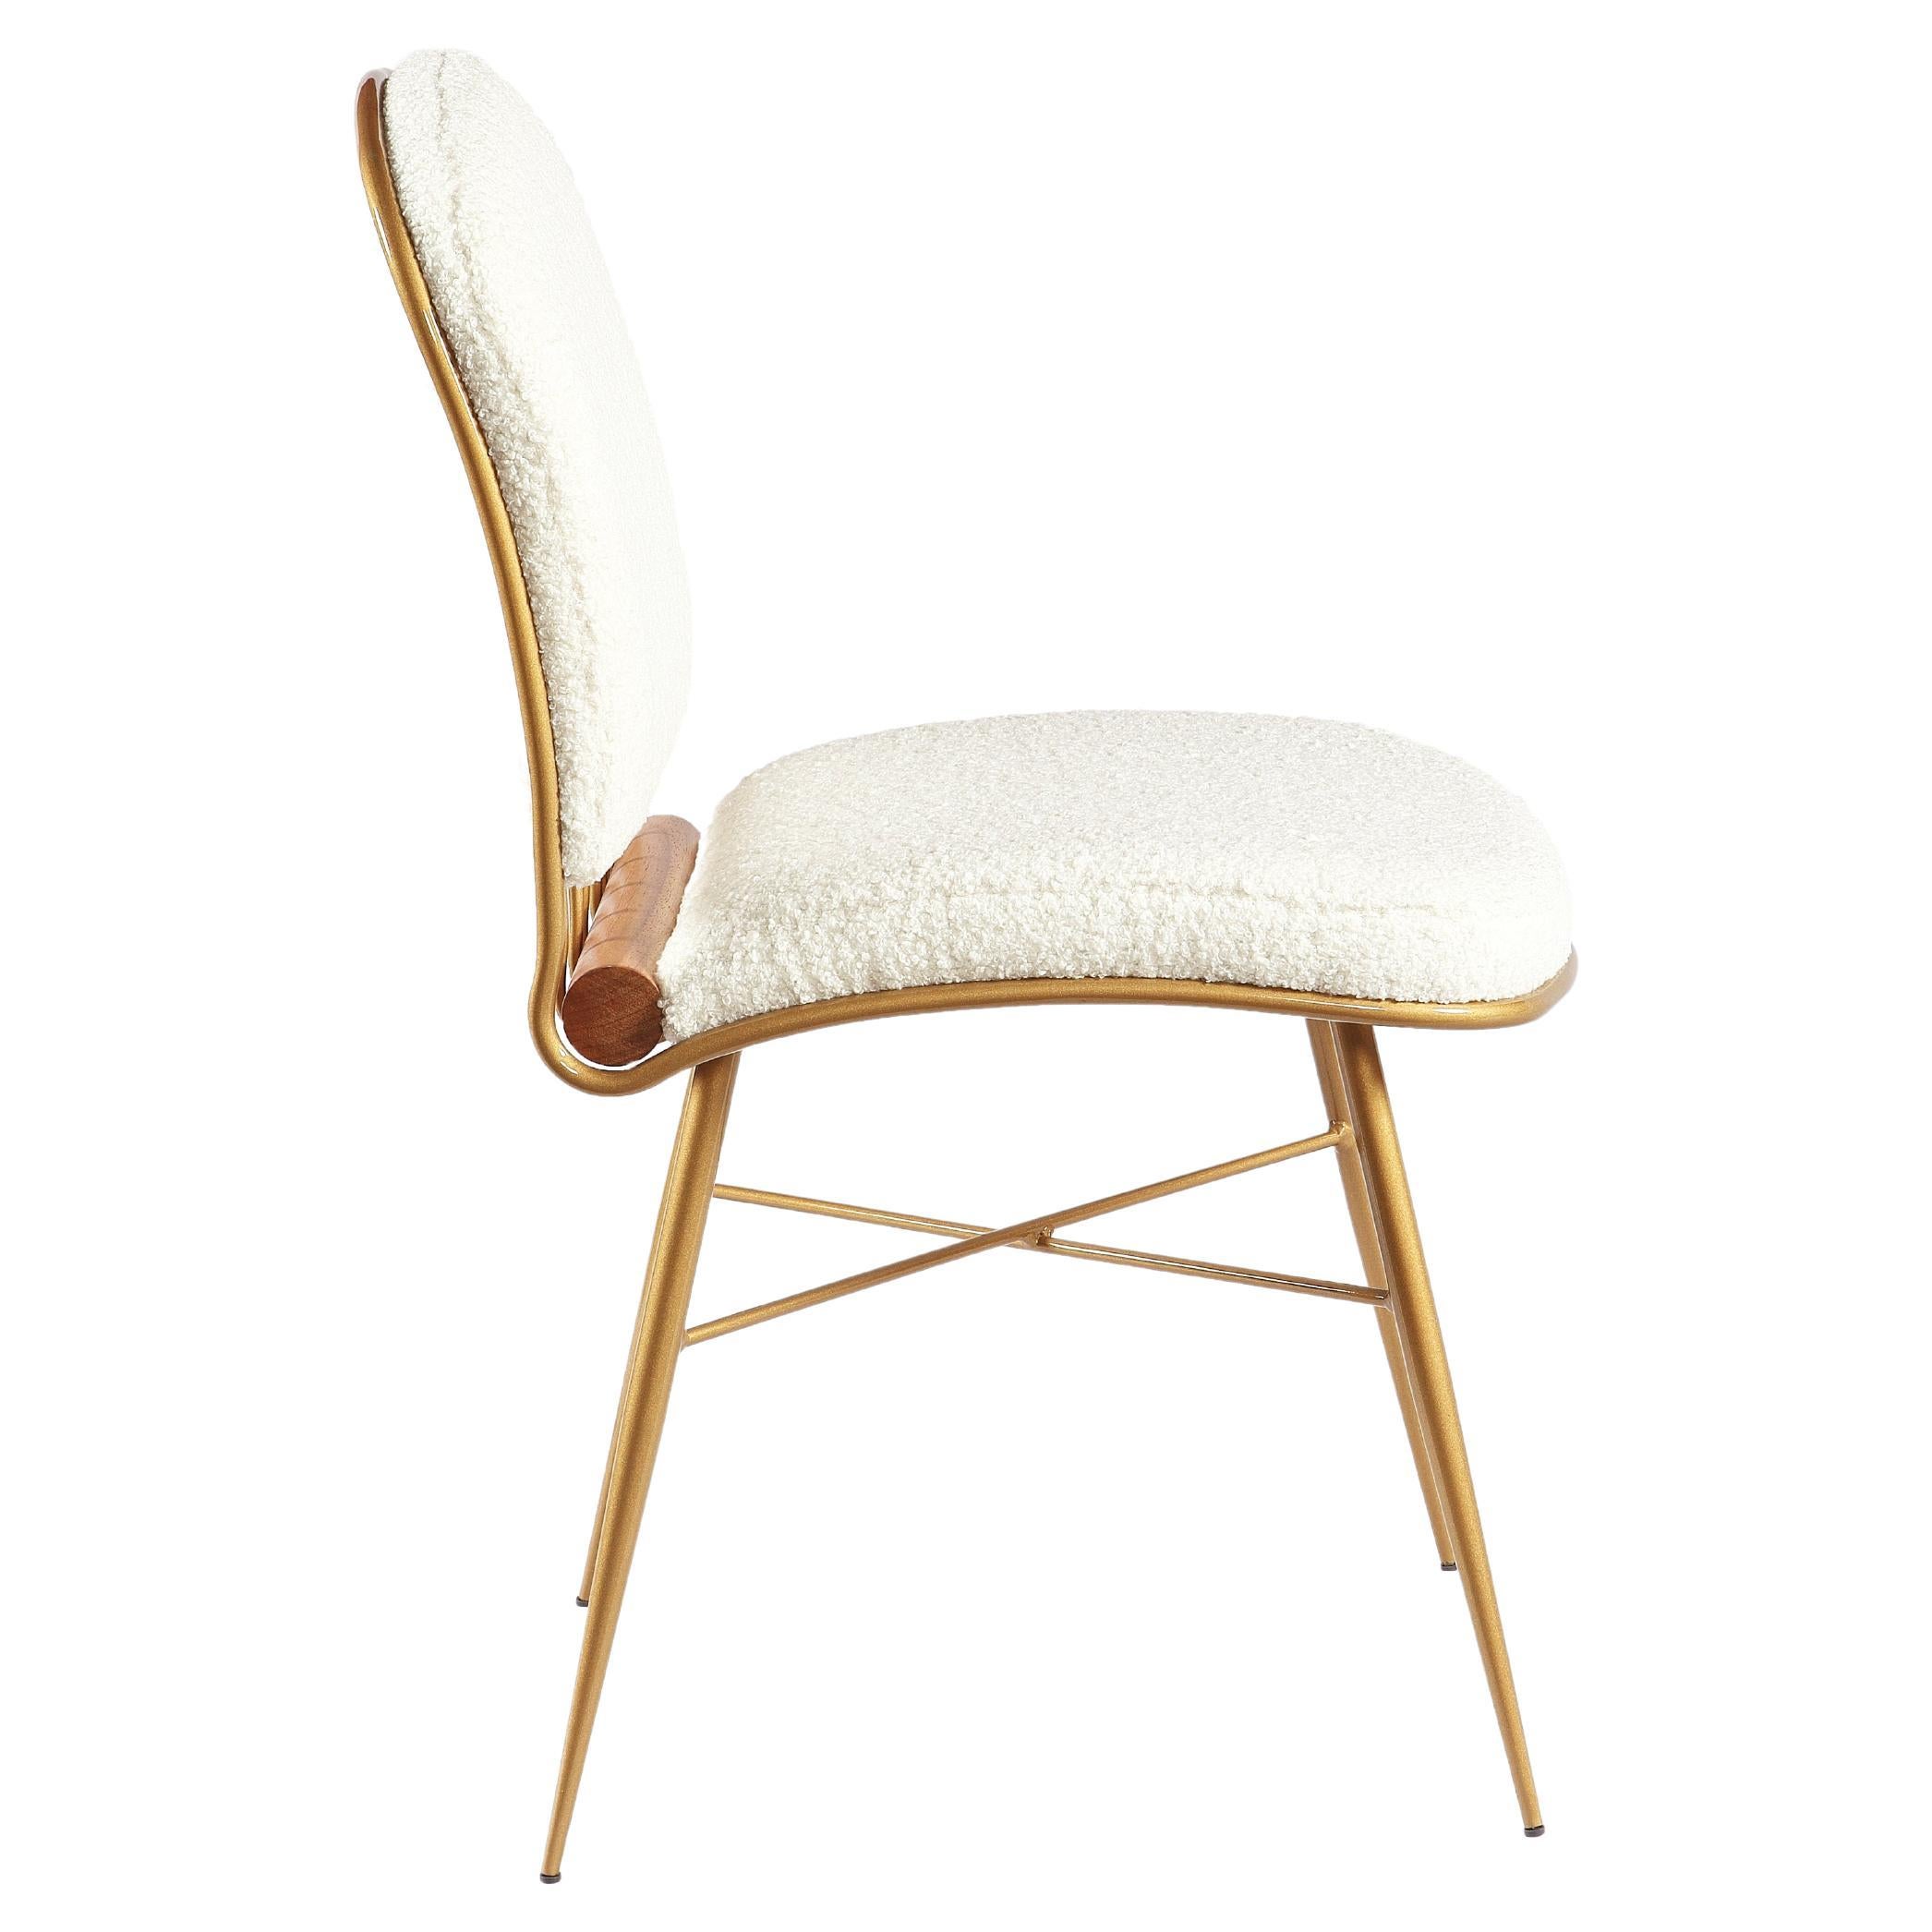 "Cuore" Chair in Matte Golden Carbon Steel, Upholstered in Bouclé Wood Detail For Sale